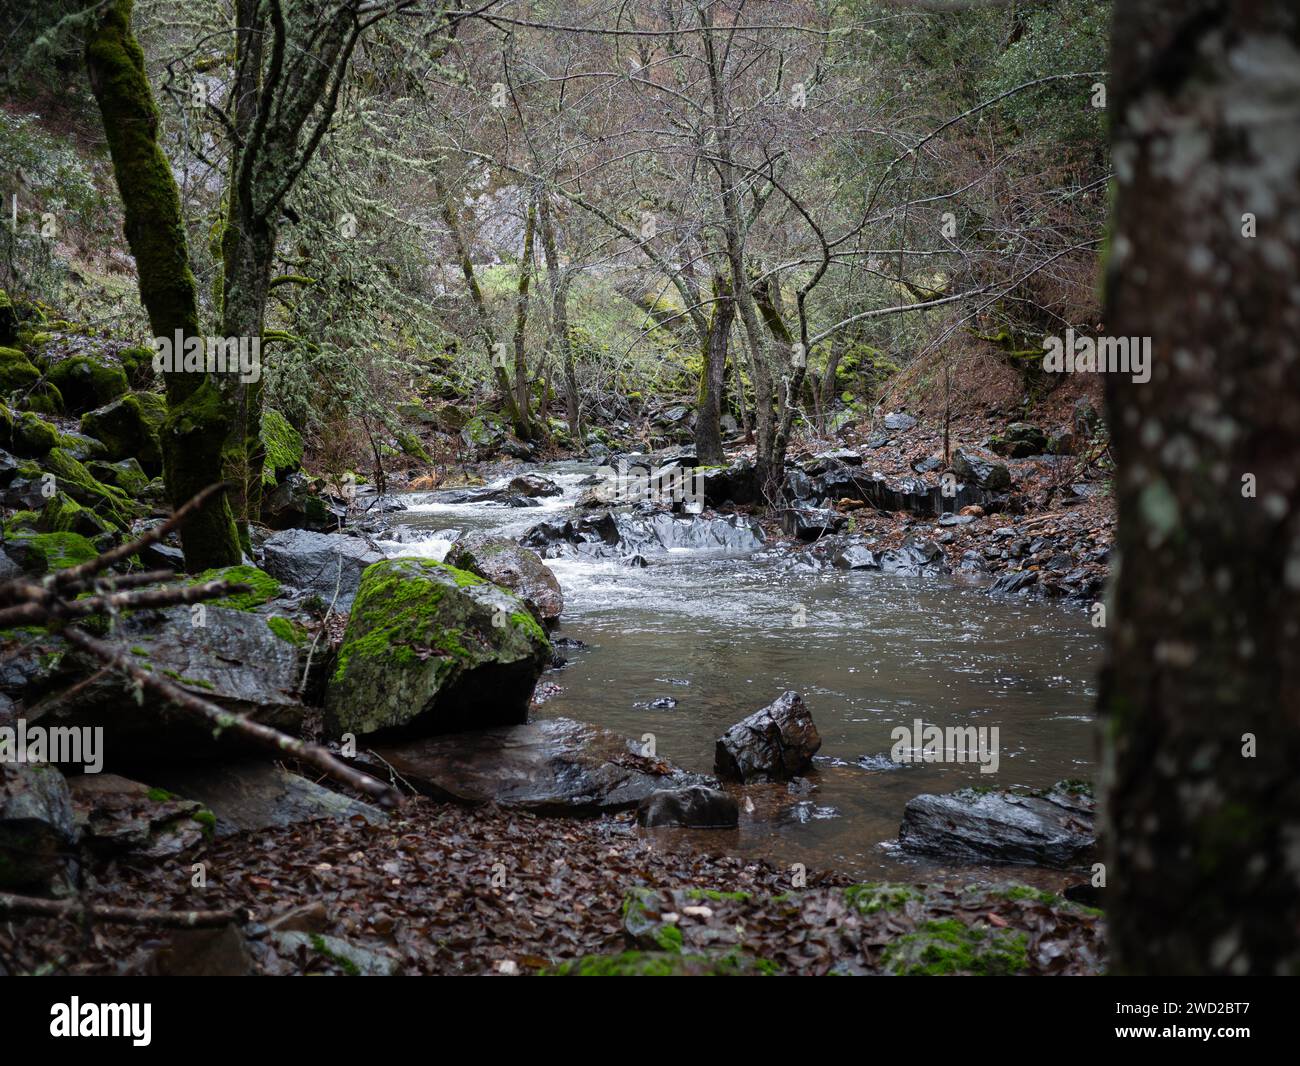 A scenic view of a river flowing through a green forest Stock Photo